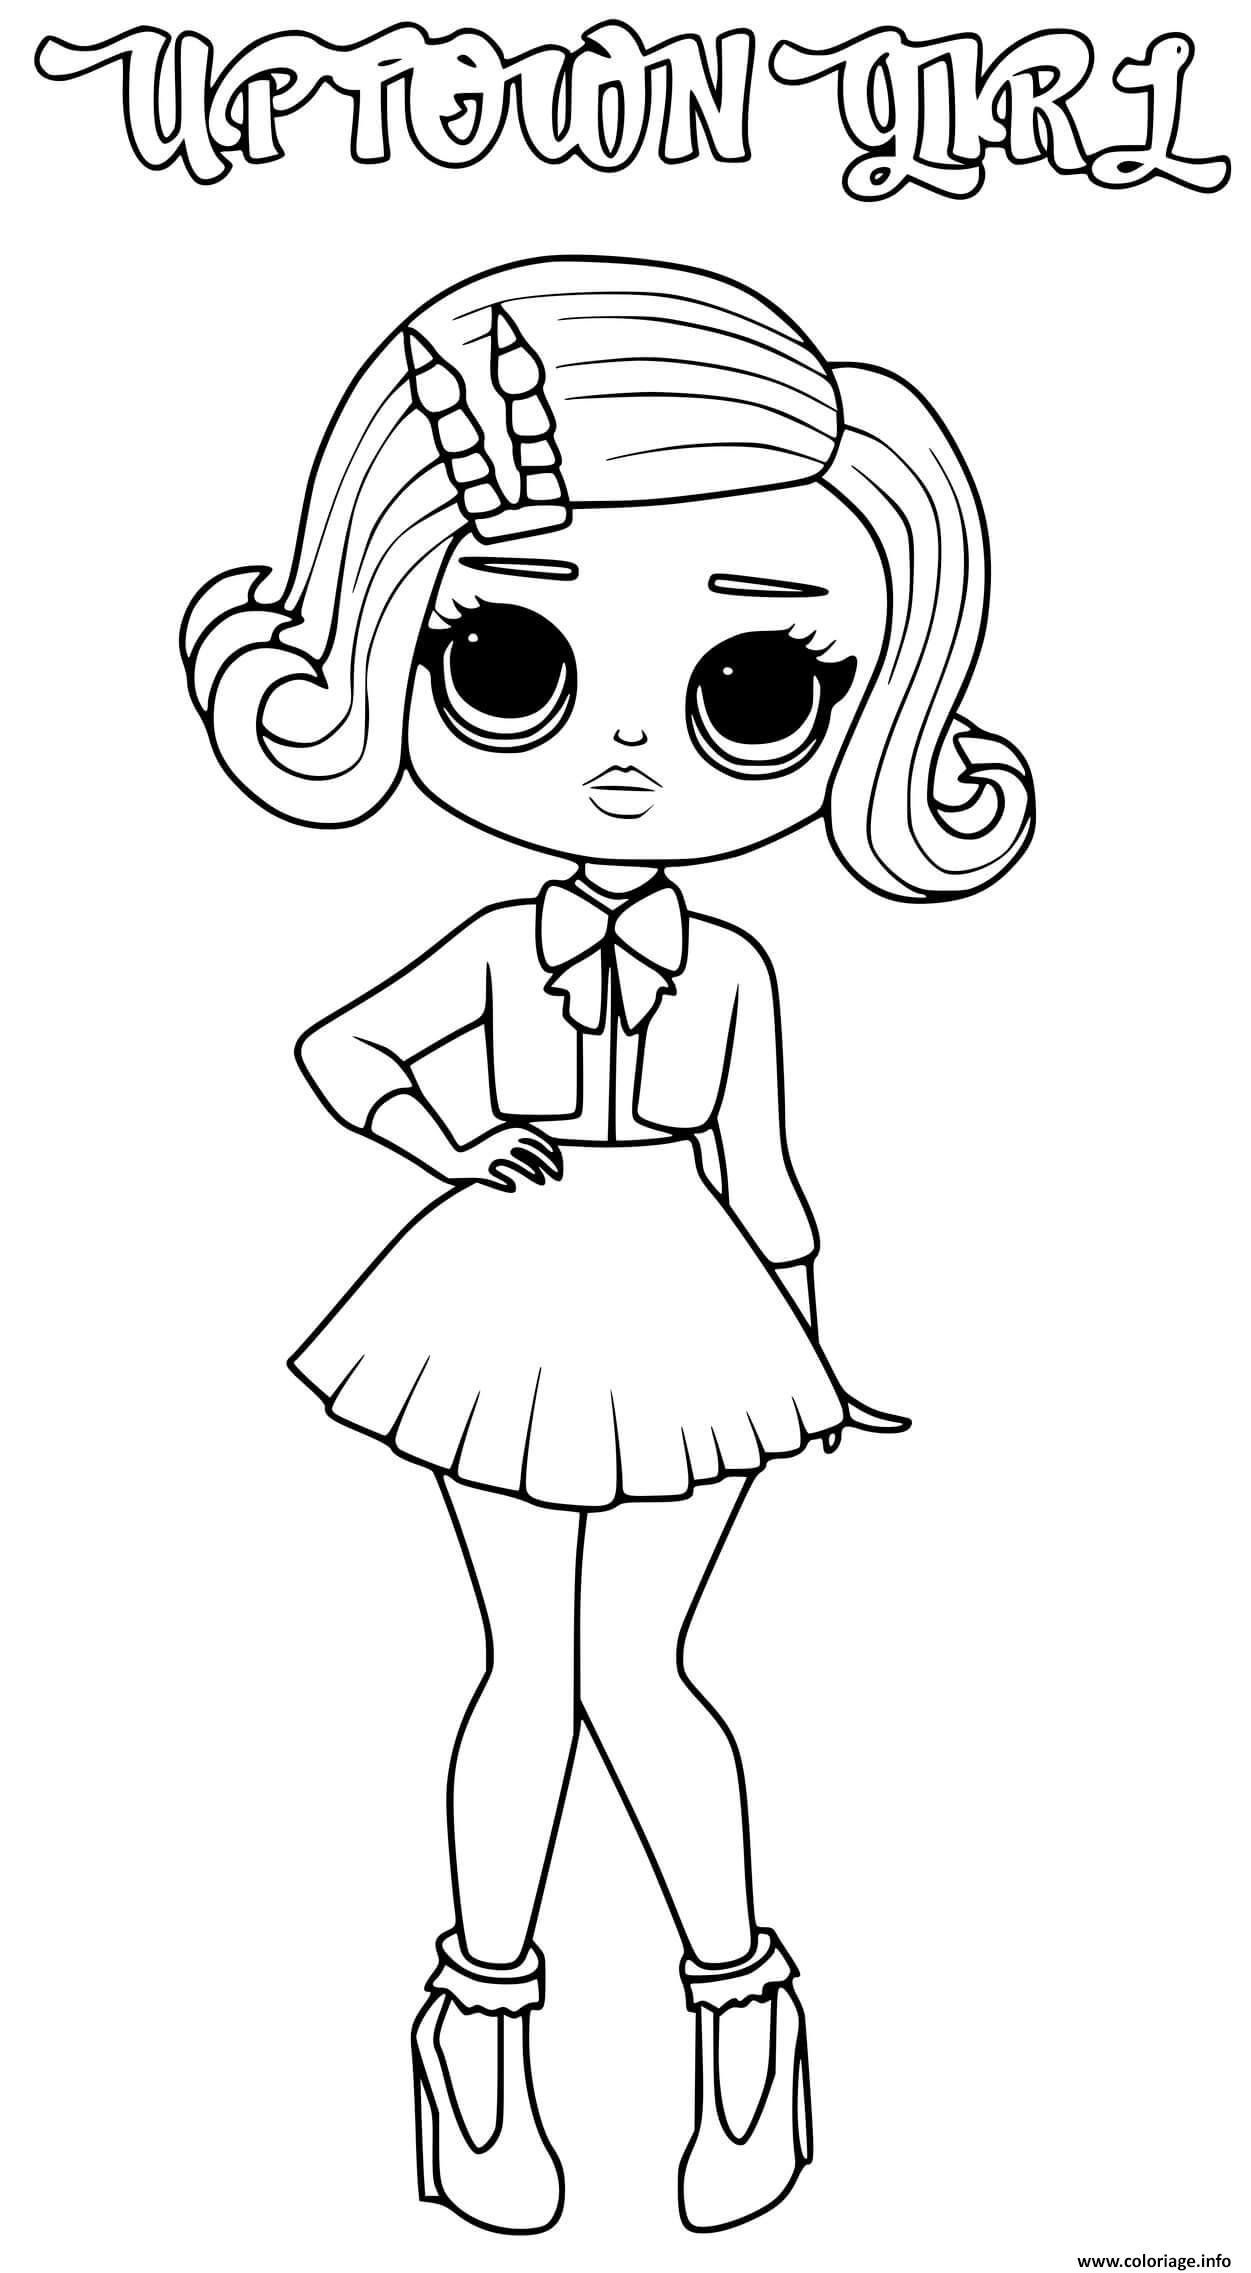 Coloriage Uptown Girl Lol Omg Dessin Poupee Lol À Imprimer destiné Poupee Lol Dessin A Imprimer